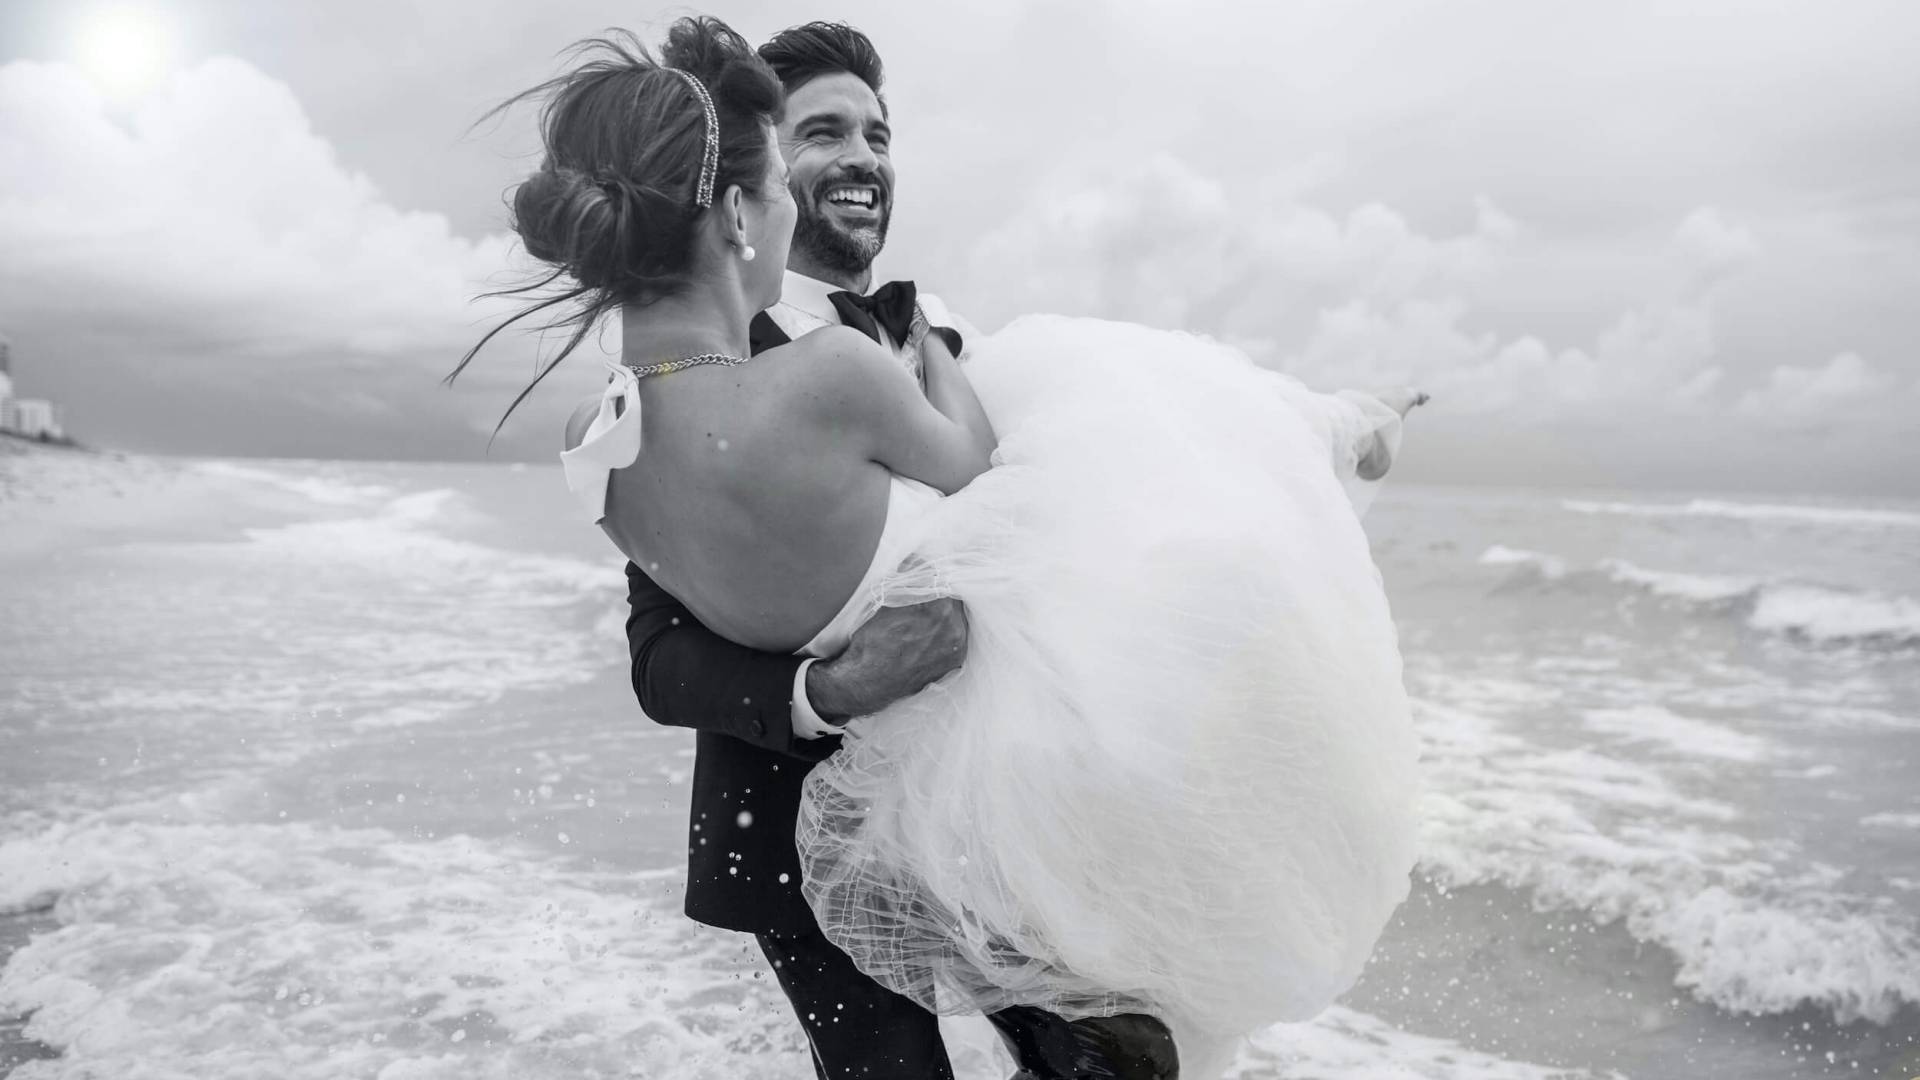 man in suit carries woman in white dress in his arms as he walks into ocean waves